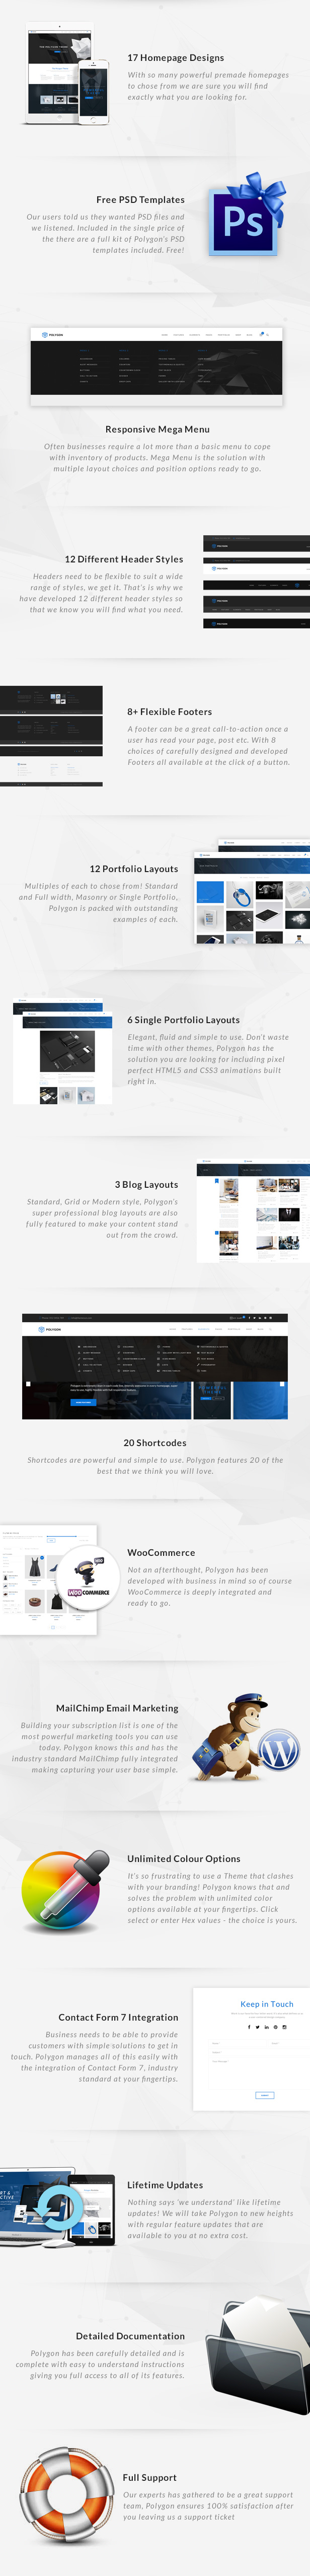 1646028455 233 4 - Polygon - Business Corporation  Agency WP Theme